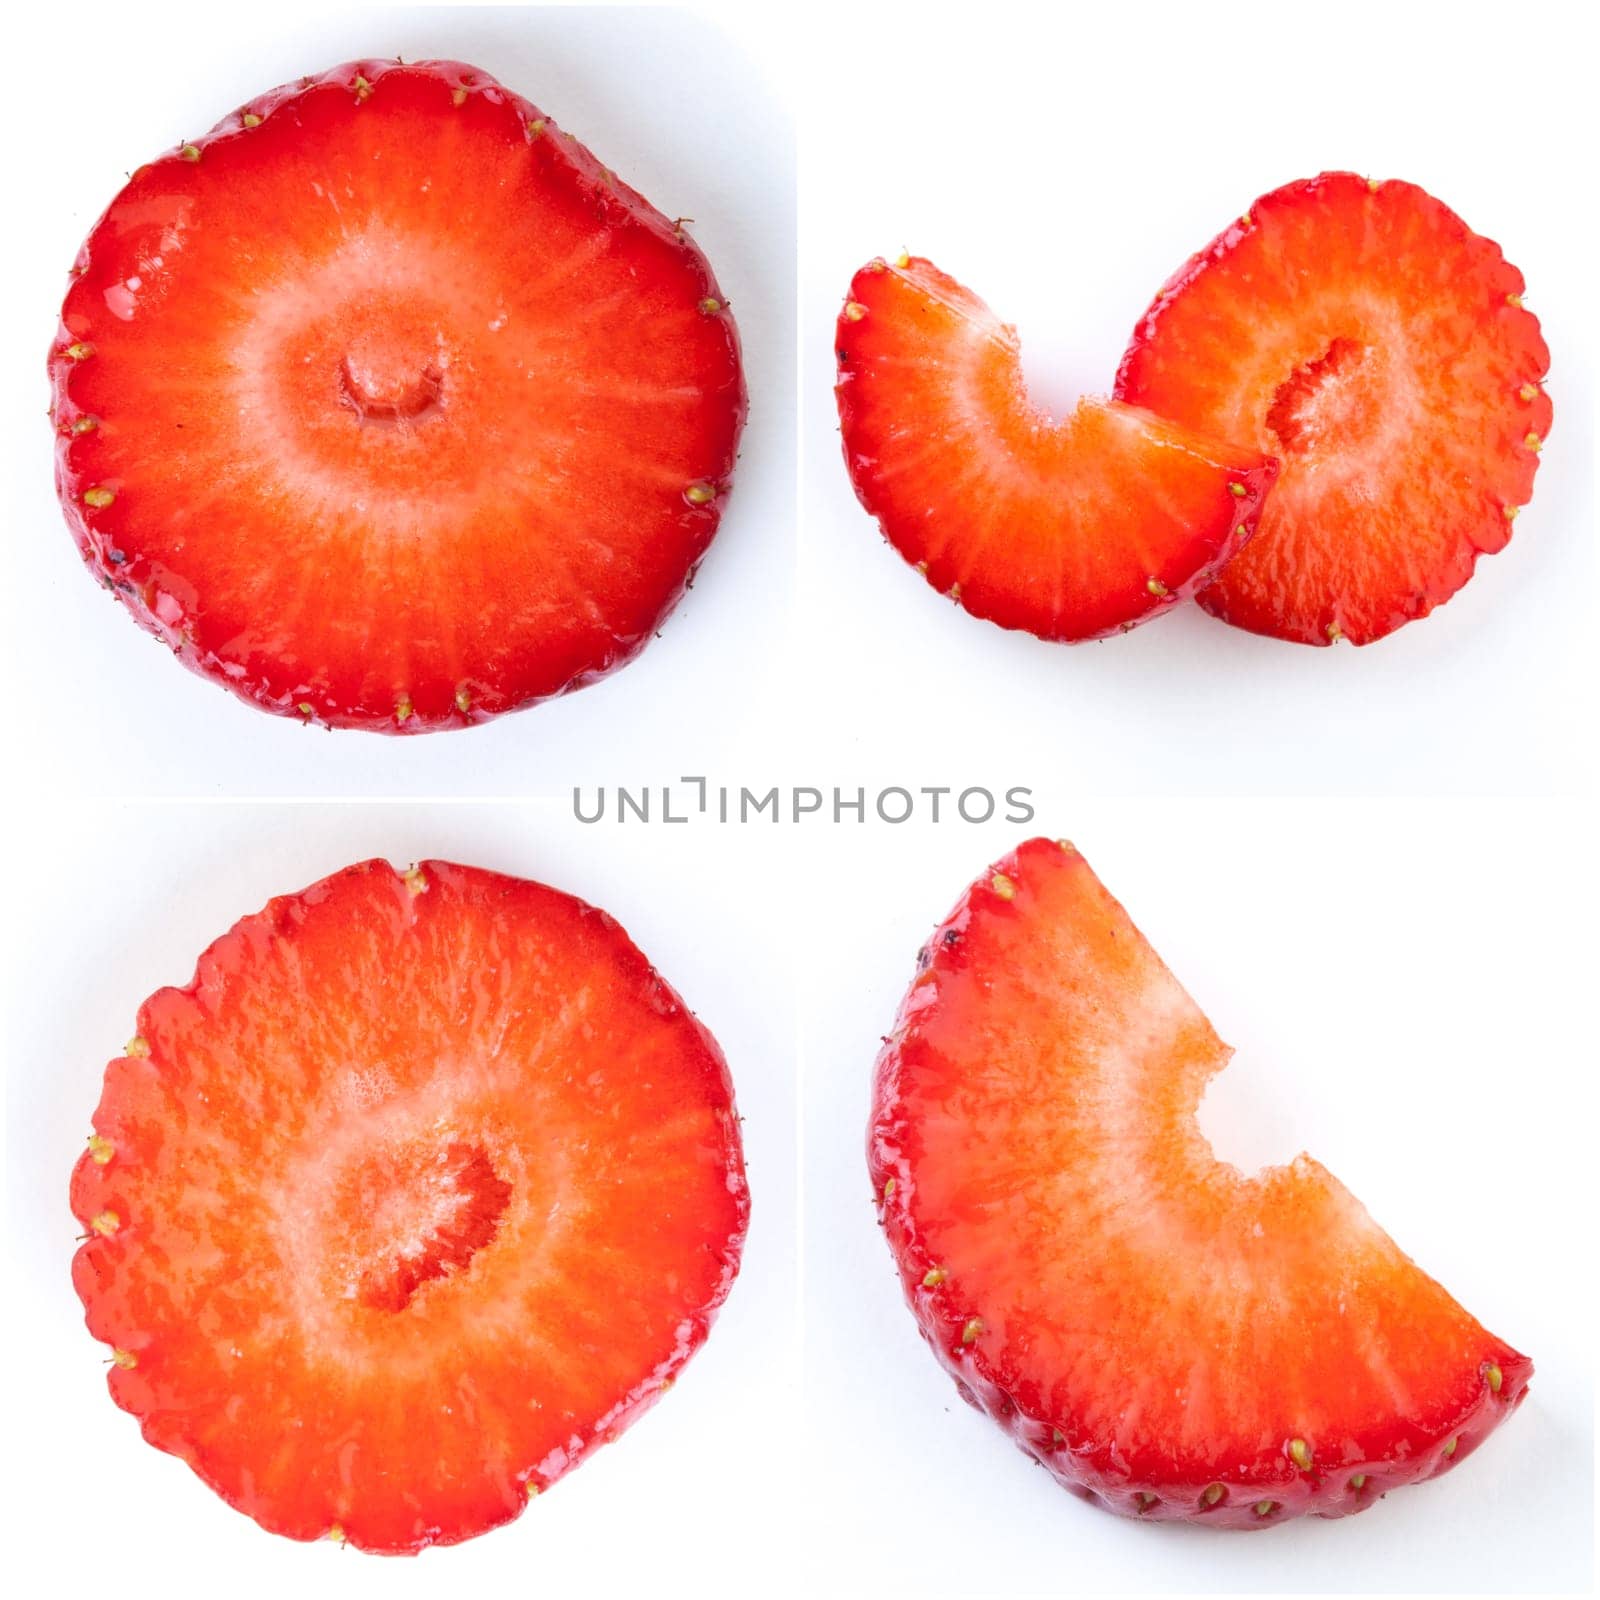 Collage of strawberries by Fabrikasimf